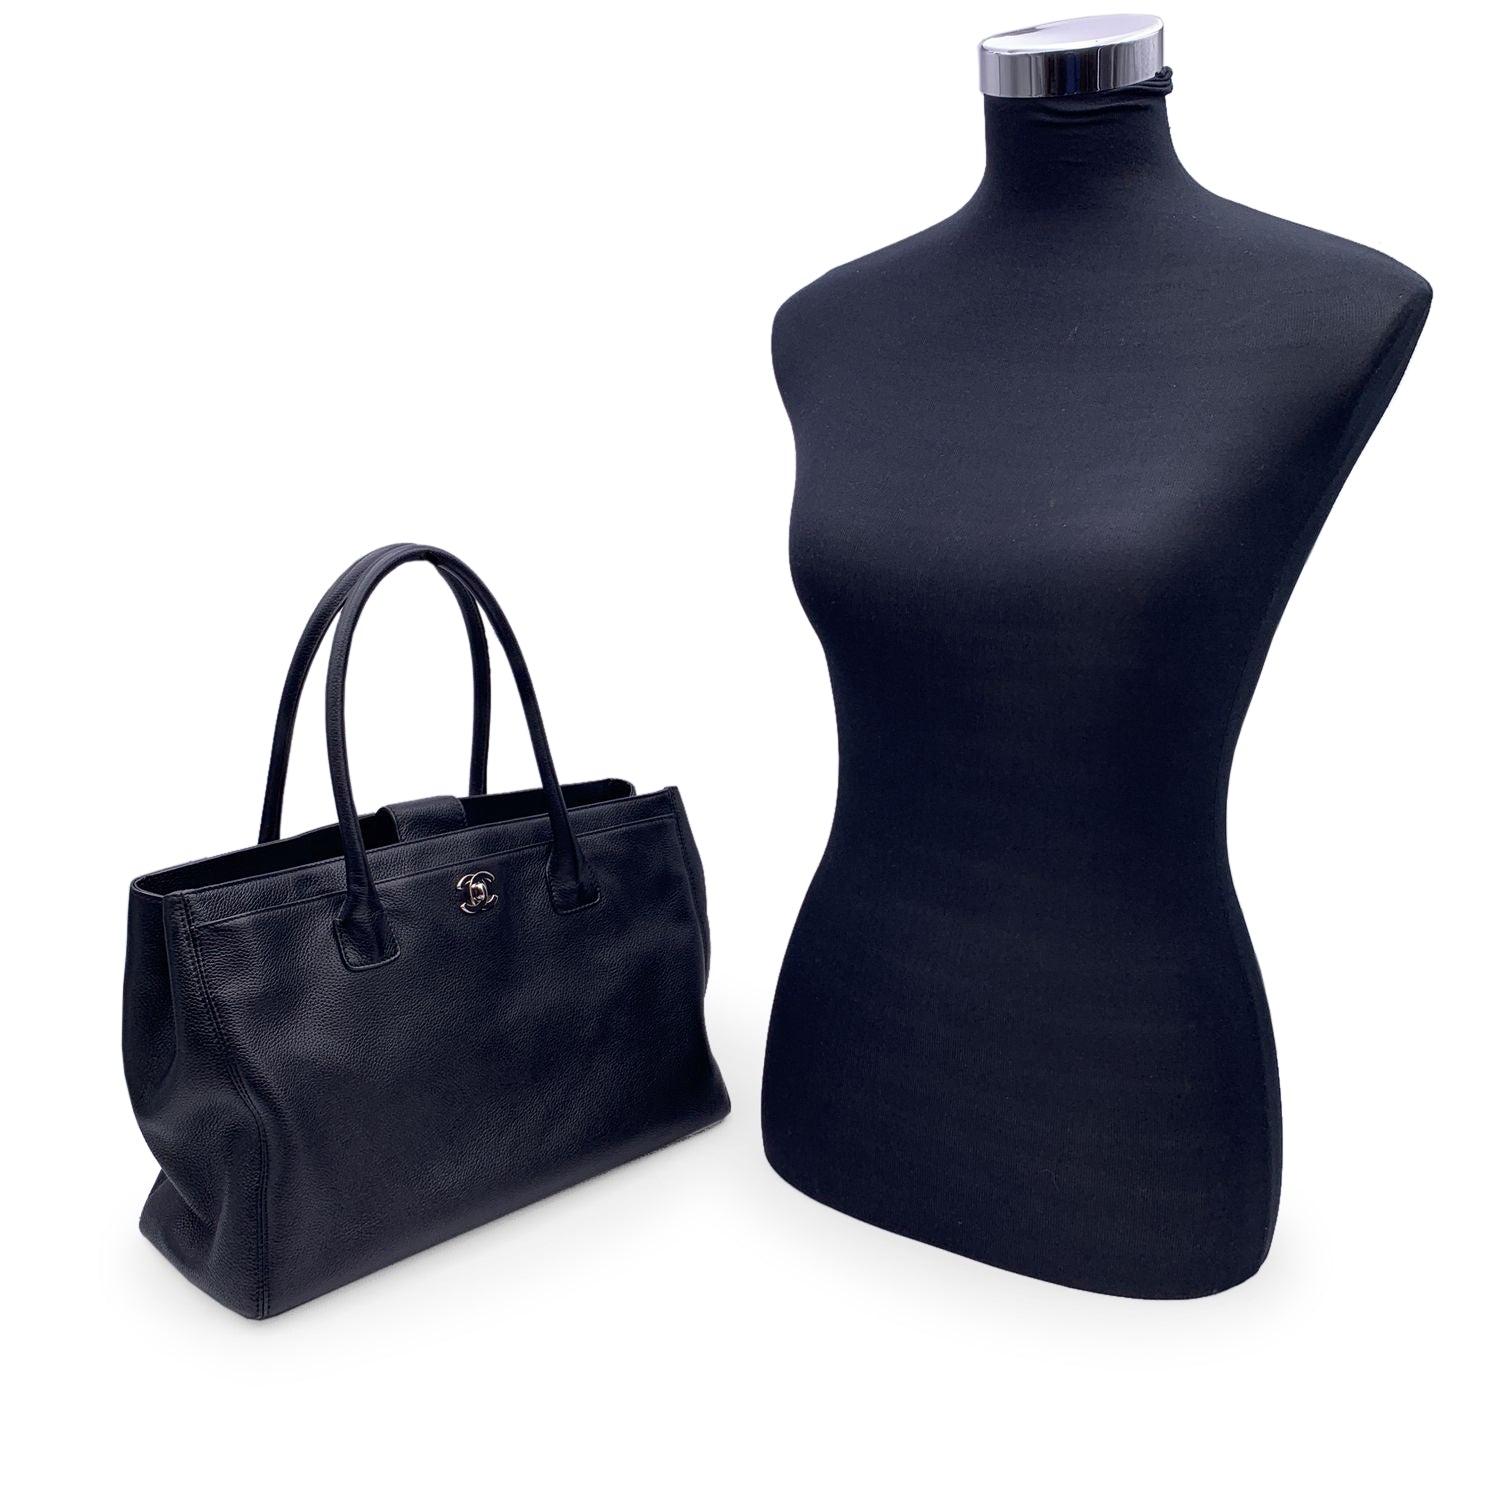 This beautiful Bag will come with a Certificate of Authenticity provided by Entrupy. The certificate will be provided at no further cost. Entrupy for this item at no further cost. Stunning Chanel 'Executive' Tote Bag in black pebbled leather.